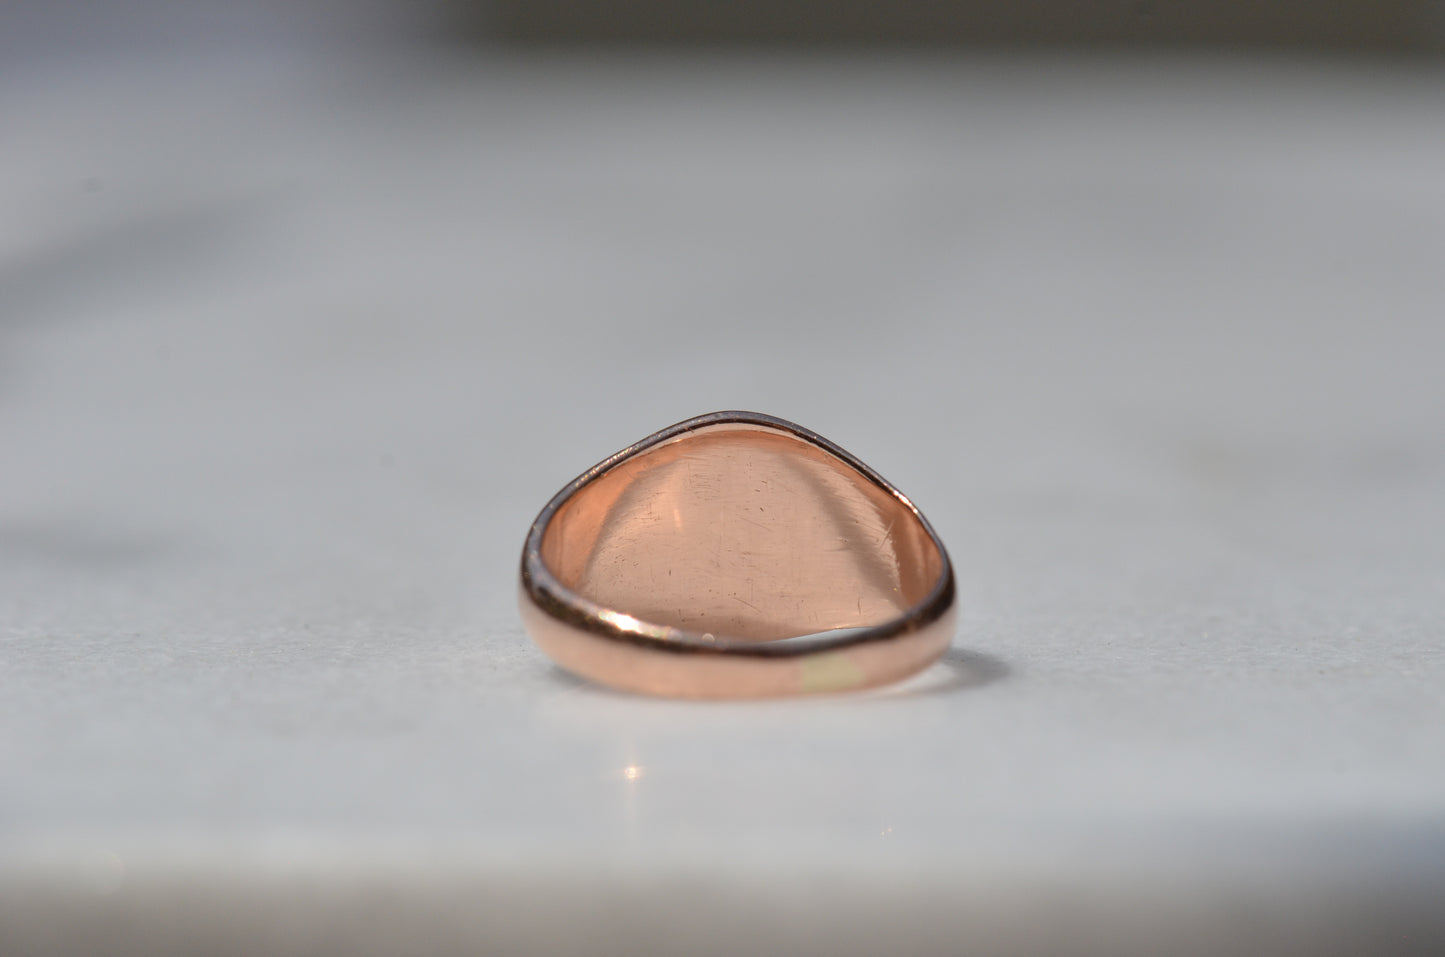 The back of the ring is shown with the back of the head in focus, showing smooth worn gold.